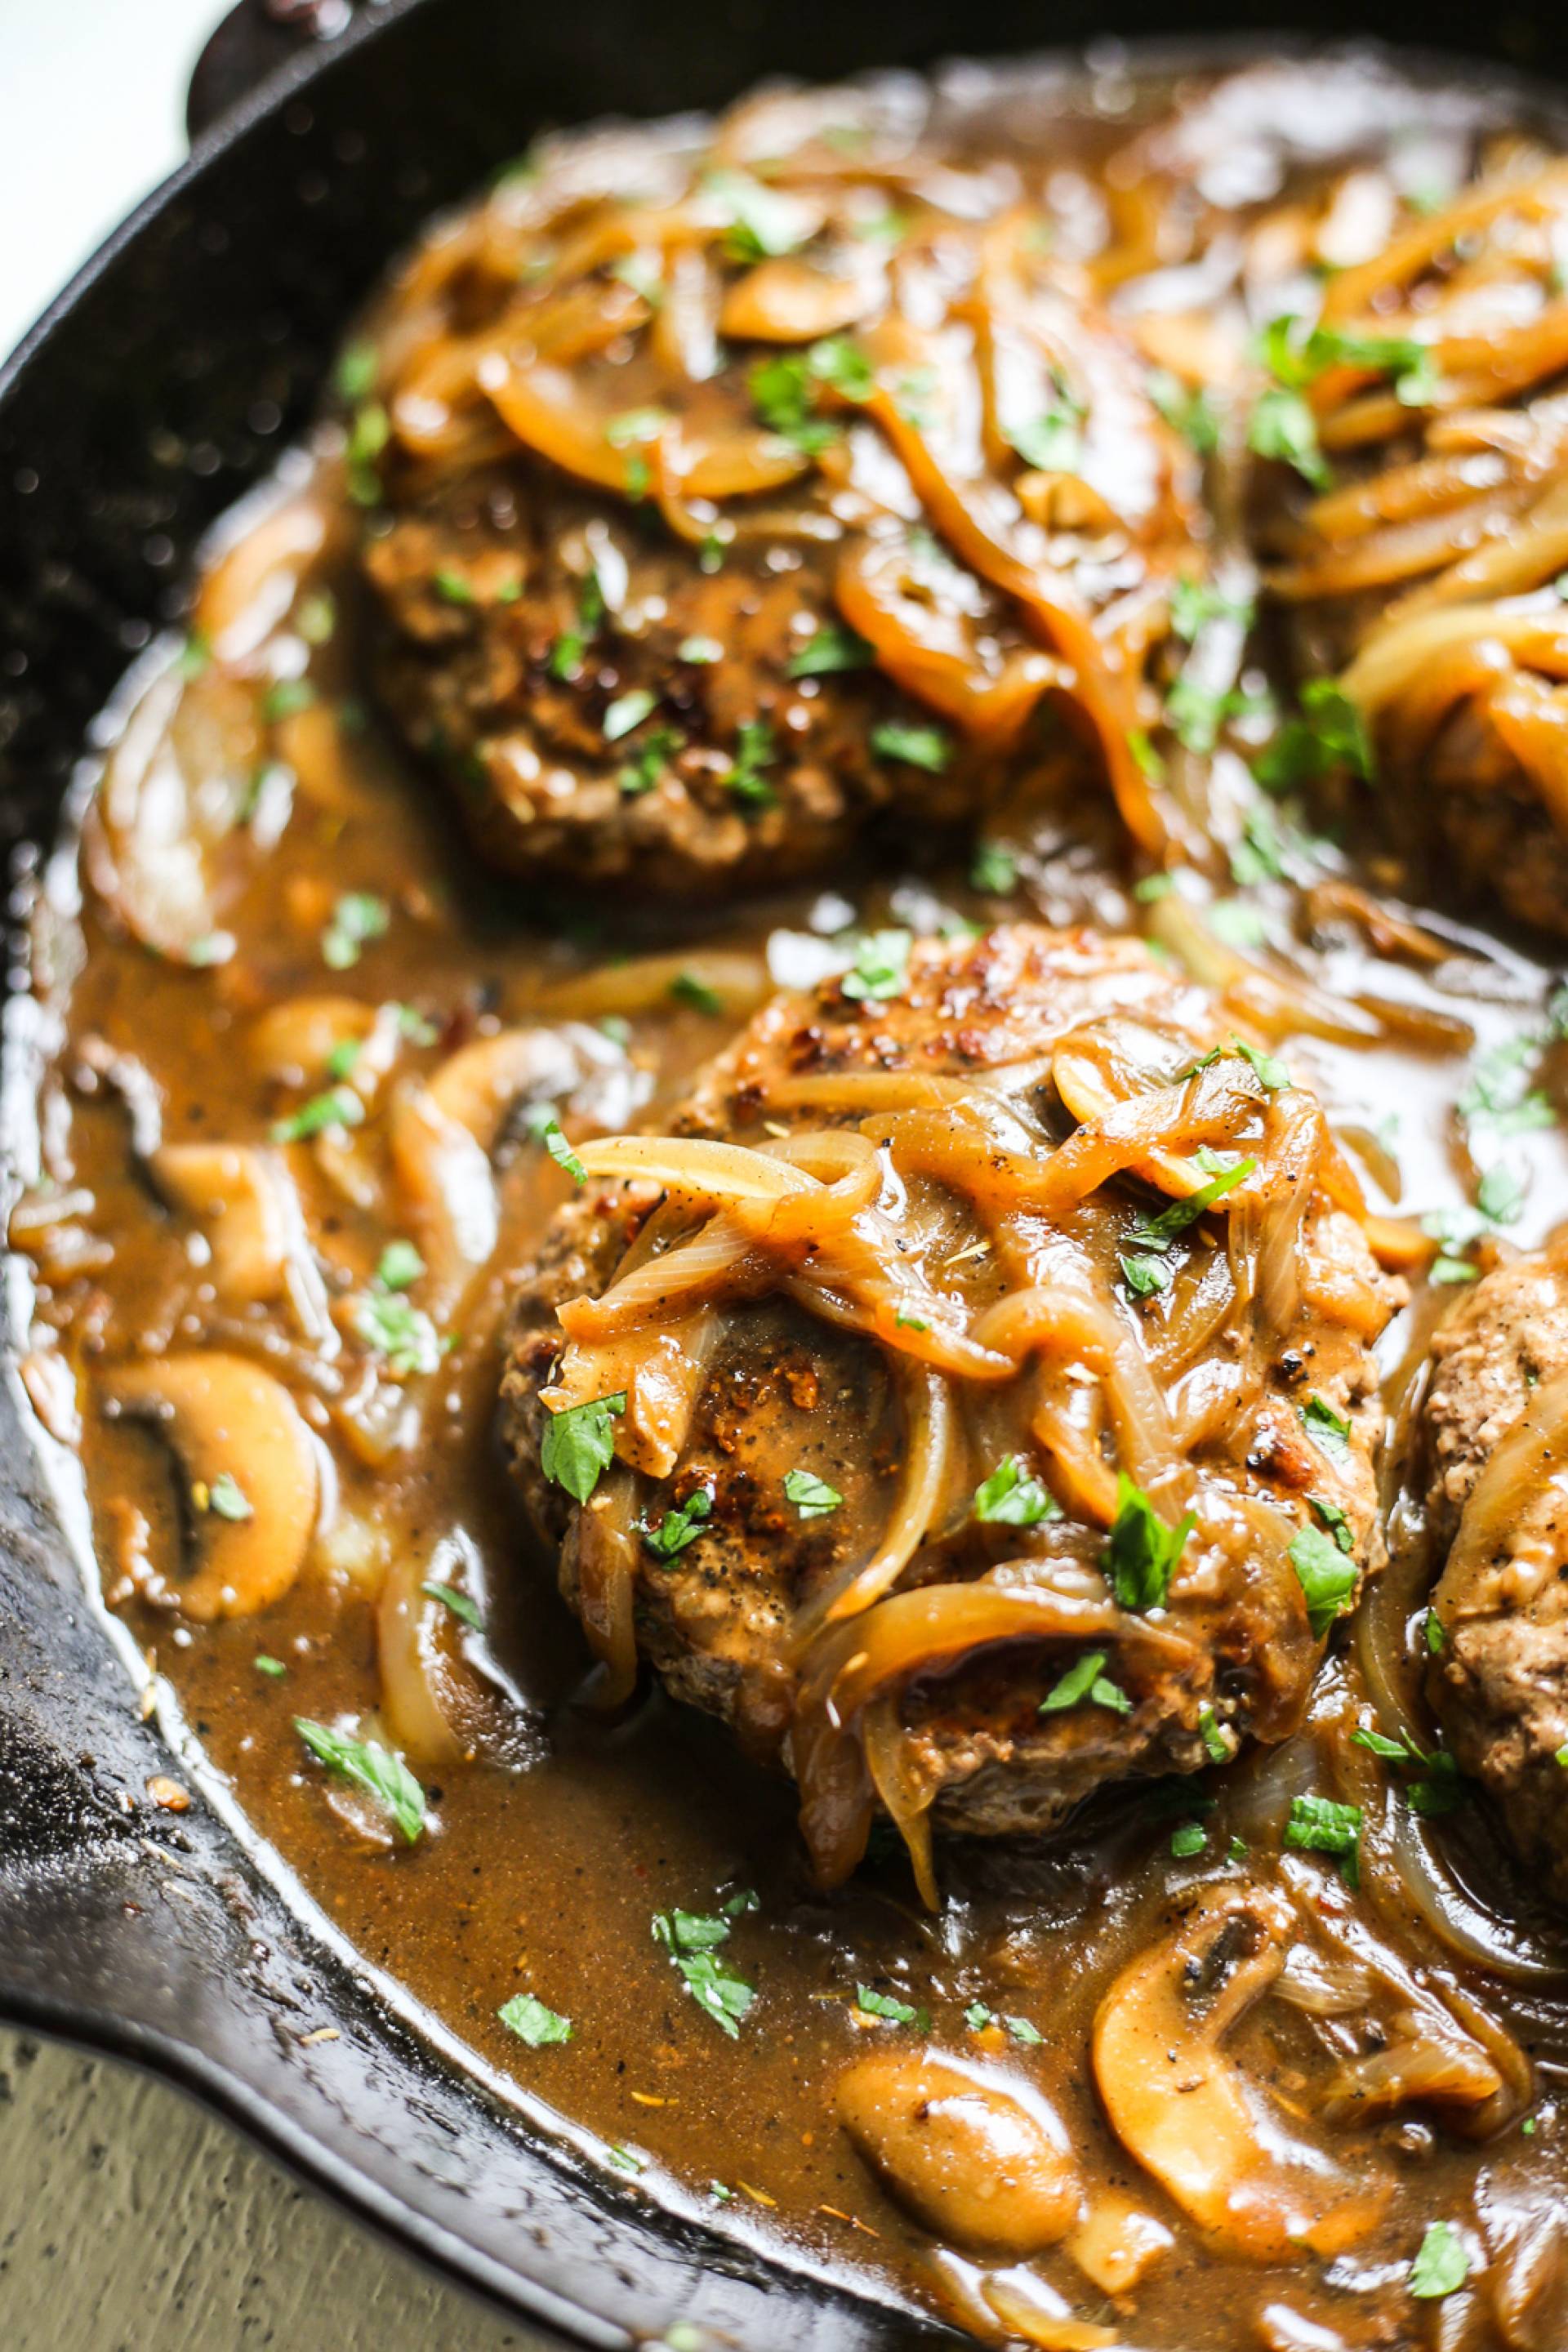 LOW CARB-Steak Burger with Caramelized Onions and Mushrooms